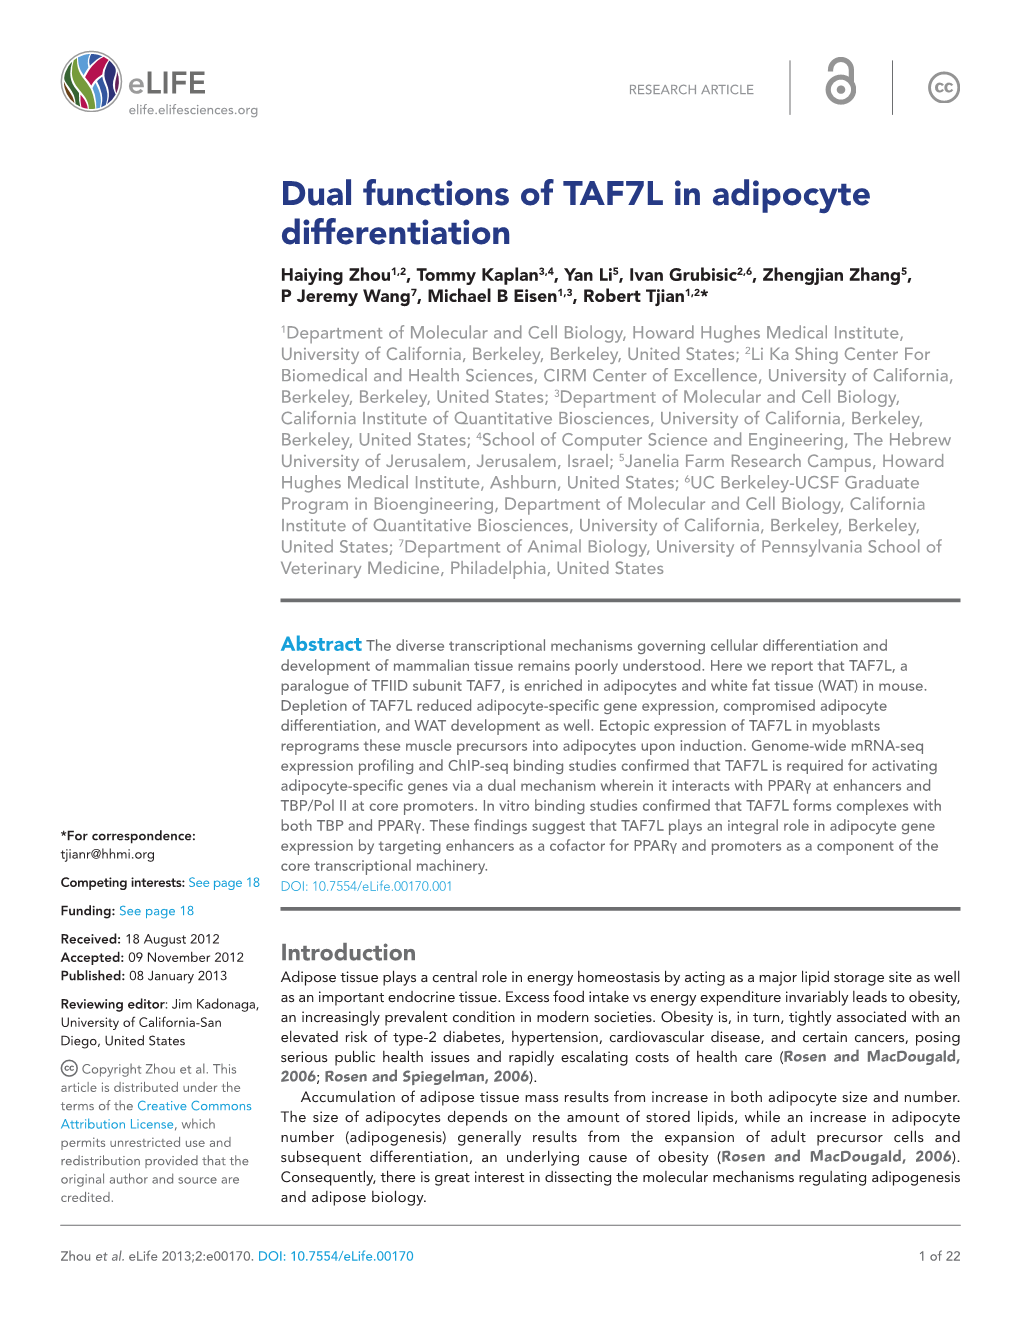 Dual Functions of TAF7L in Adipocyte Differentiation